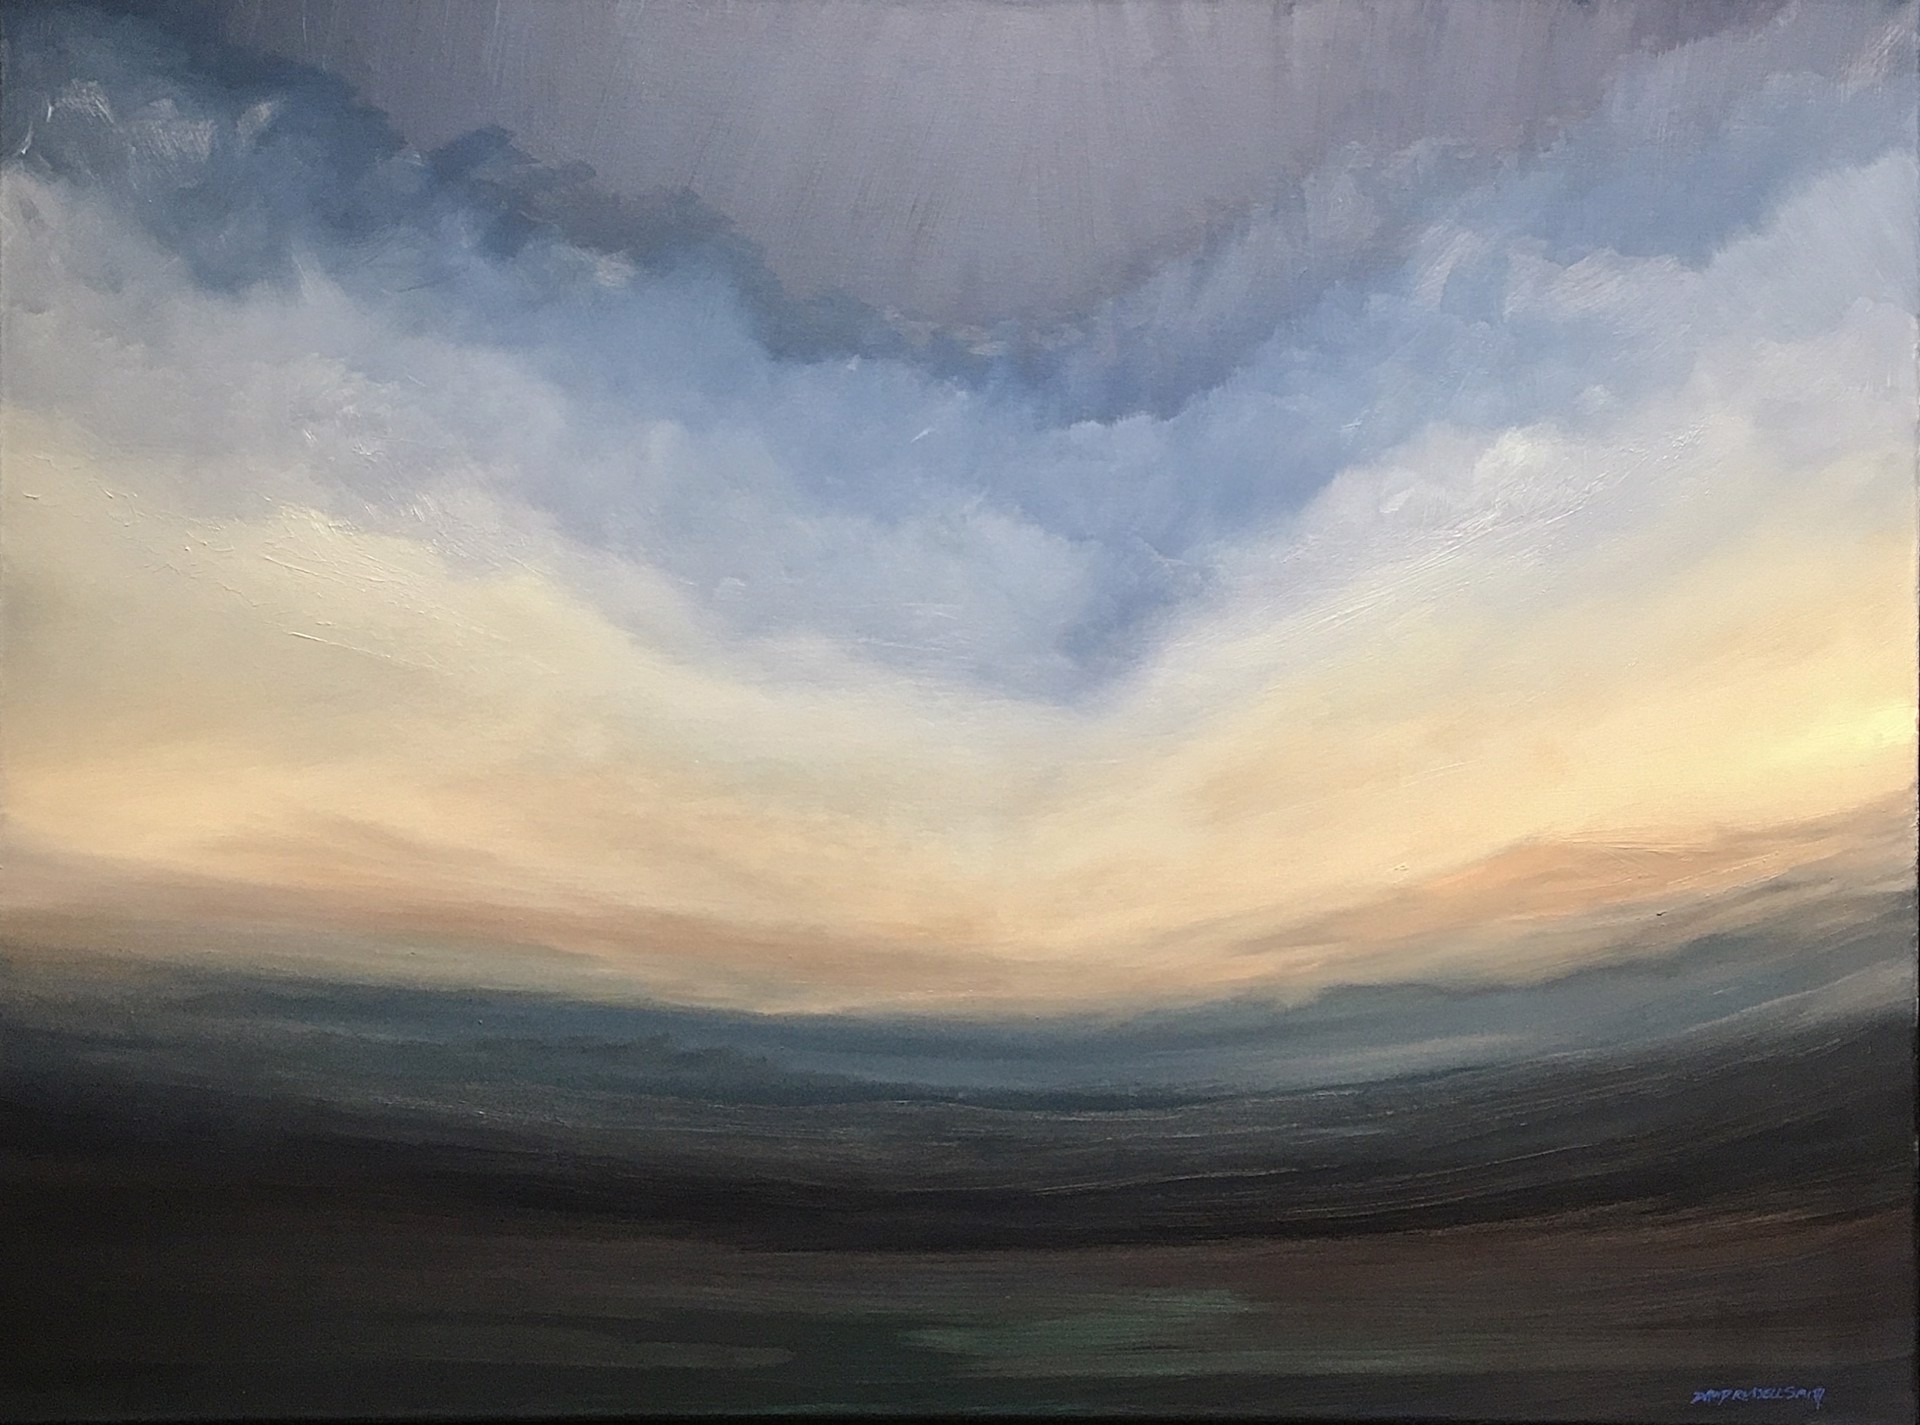 Surreal Skies, No. 9 by David Russell Smith